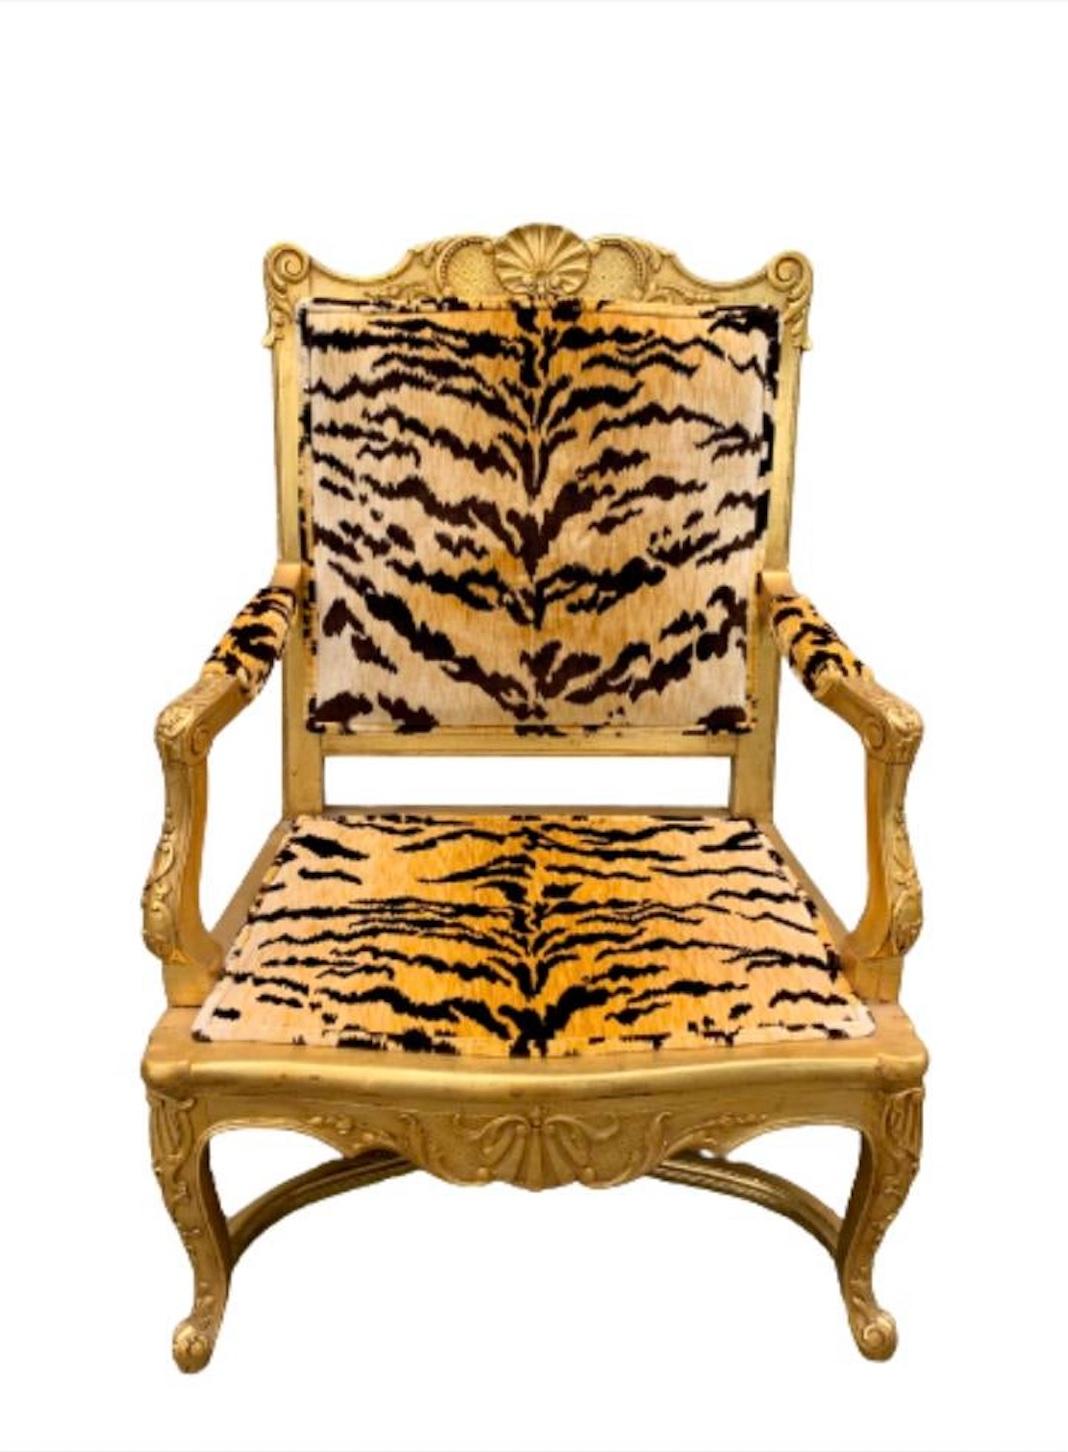 French Regency Giltwood Fauteuil Lounge Chair in Scalamandré Le Tigre Tiger Silk For Sale 5